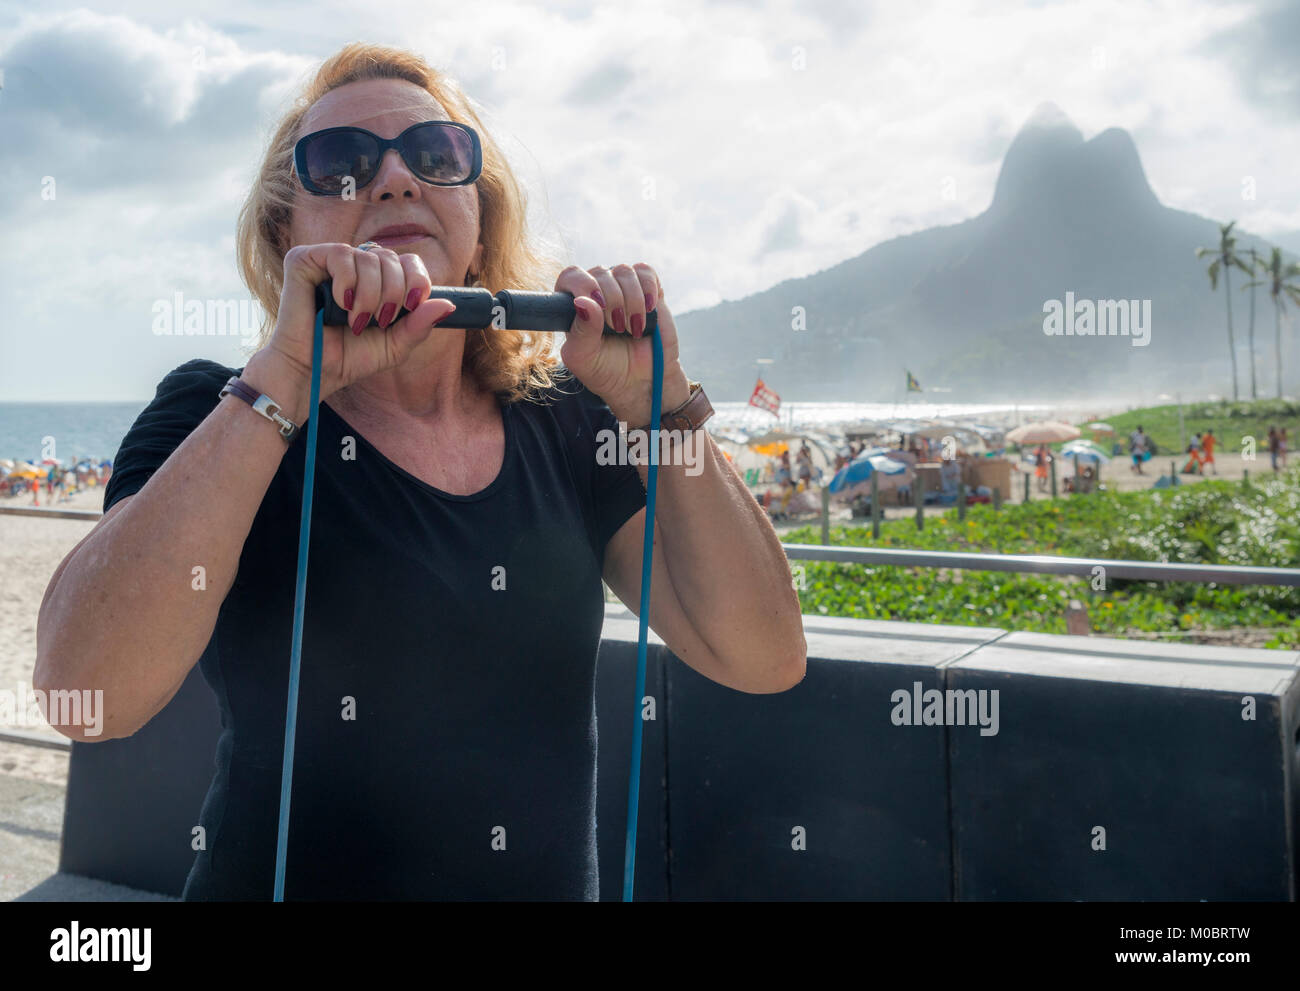 Model Released: Mature woman (70-75) exercising with a stretch cord at open air gym in Ipanema Beach, Rio de Janeiro, Brazil Stock Photo